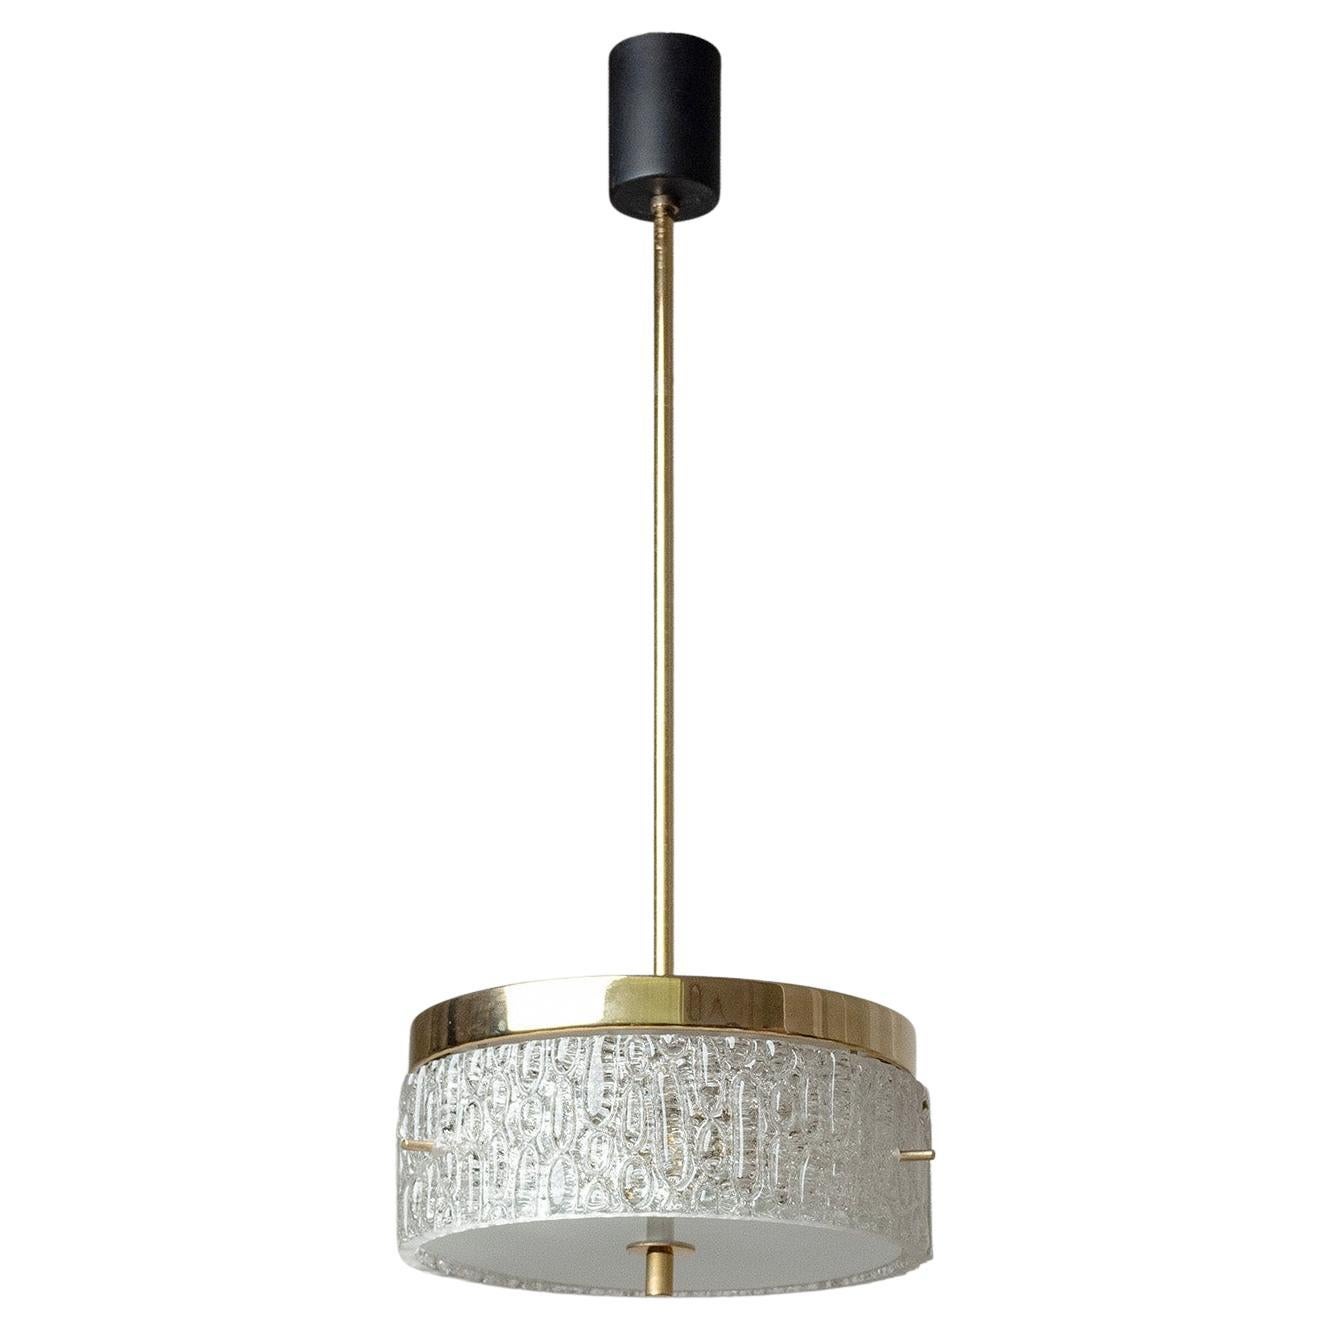 French Modern Pendant, 1960s, Textured Glass and Gilt Brass